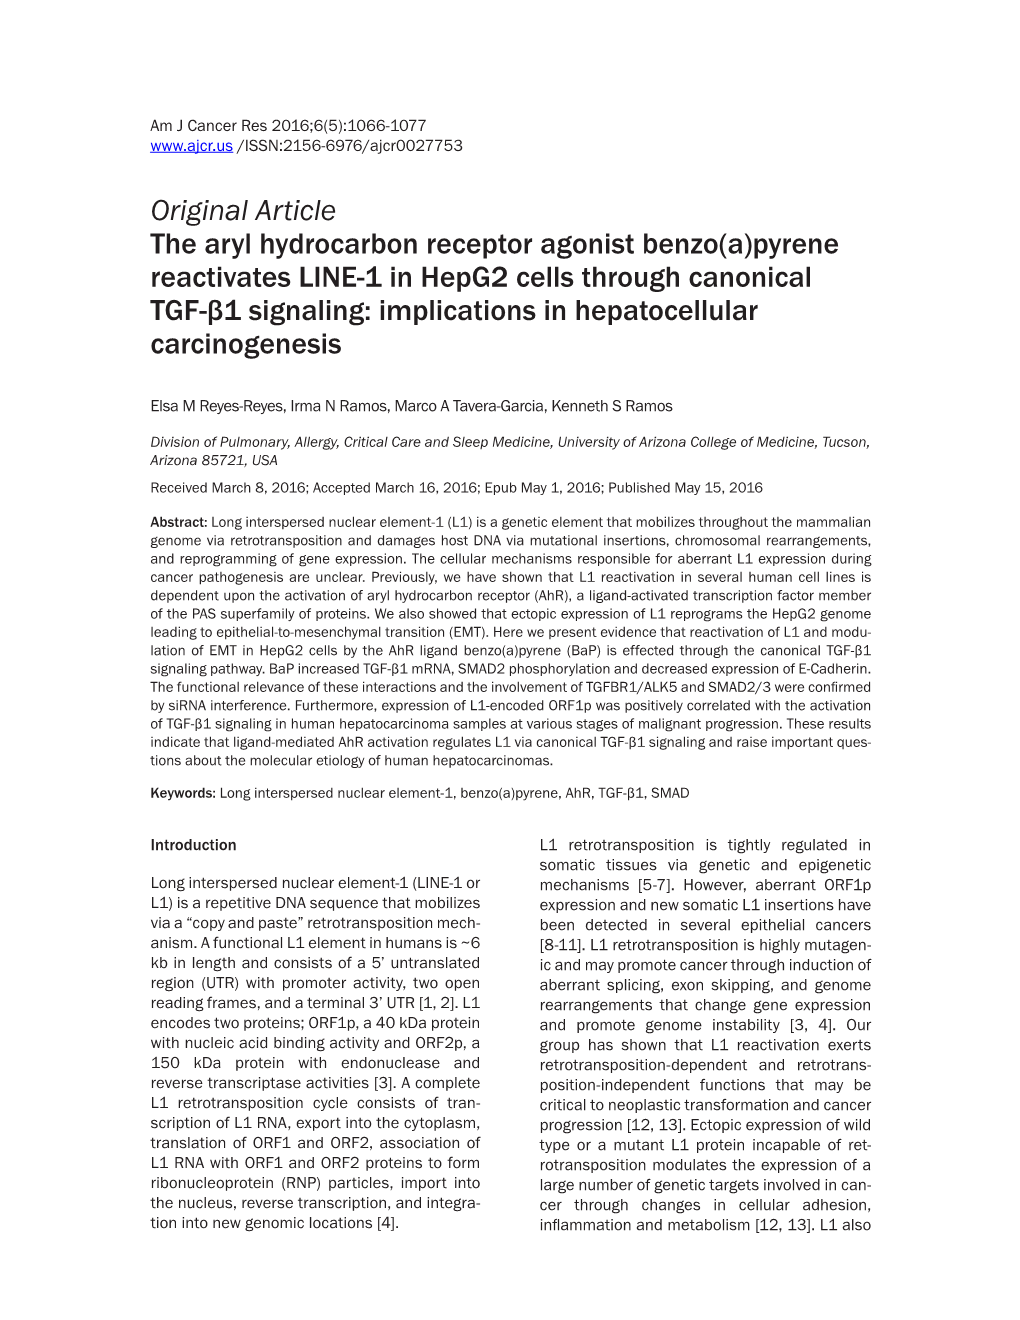 Original Article the Aryl Hydrocarbon Receptor Agonist Benzo(A)Pyrene